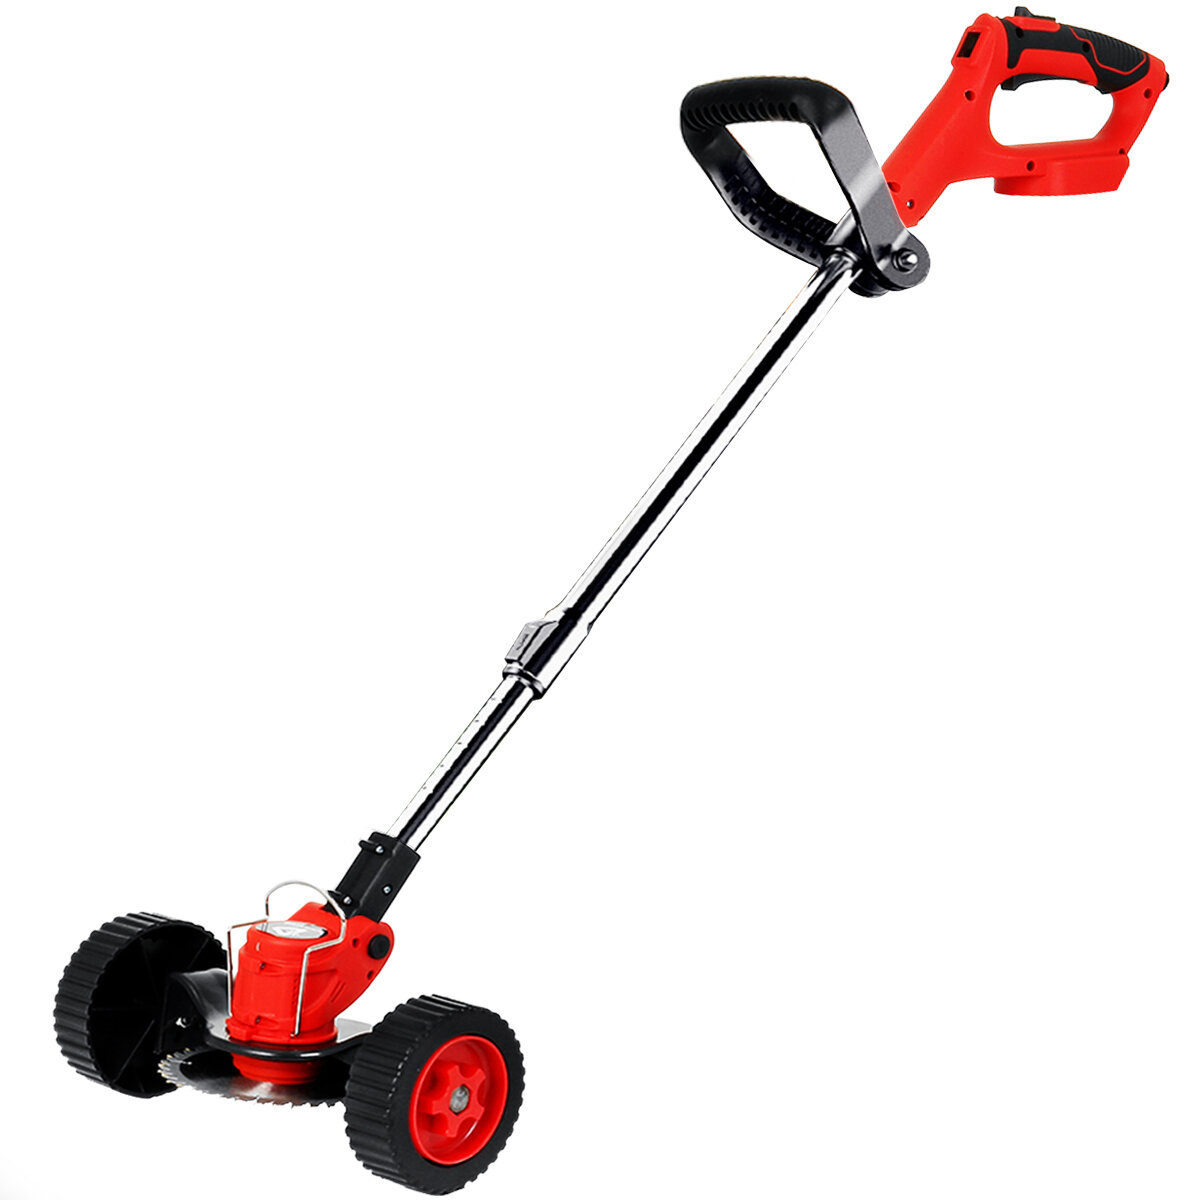 Doersupp Rechargable Grass Trimmer Hand-push Gass Mower Lawnmower Power Display Adapted to Battery